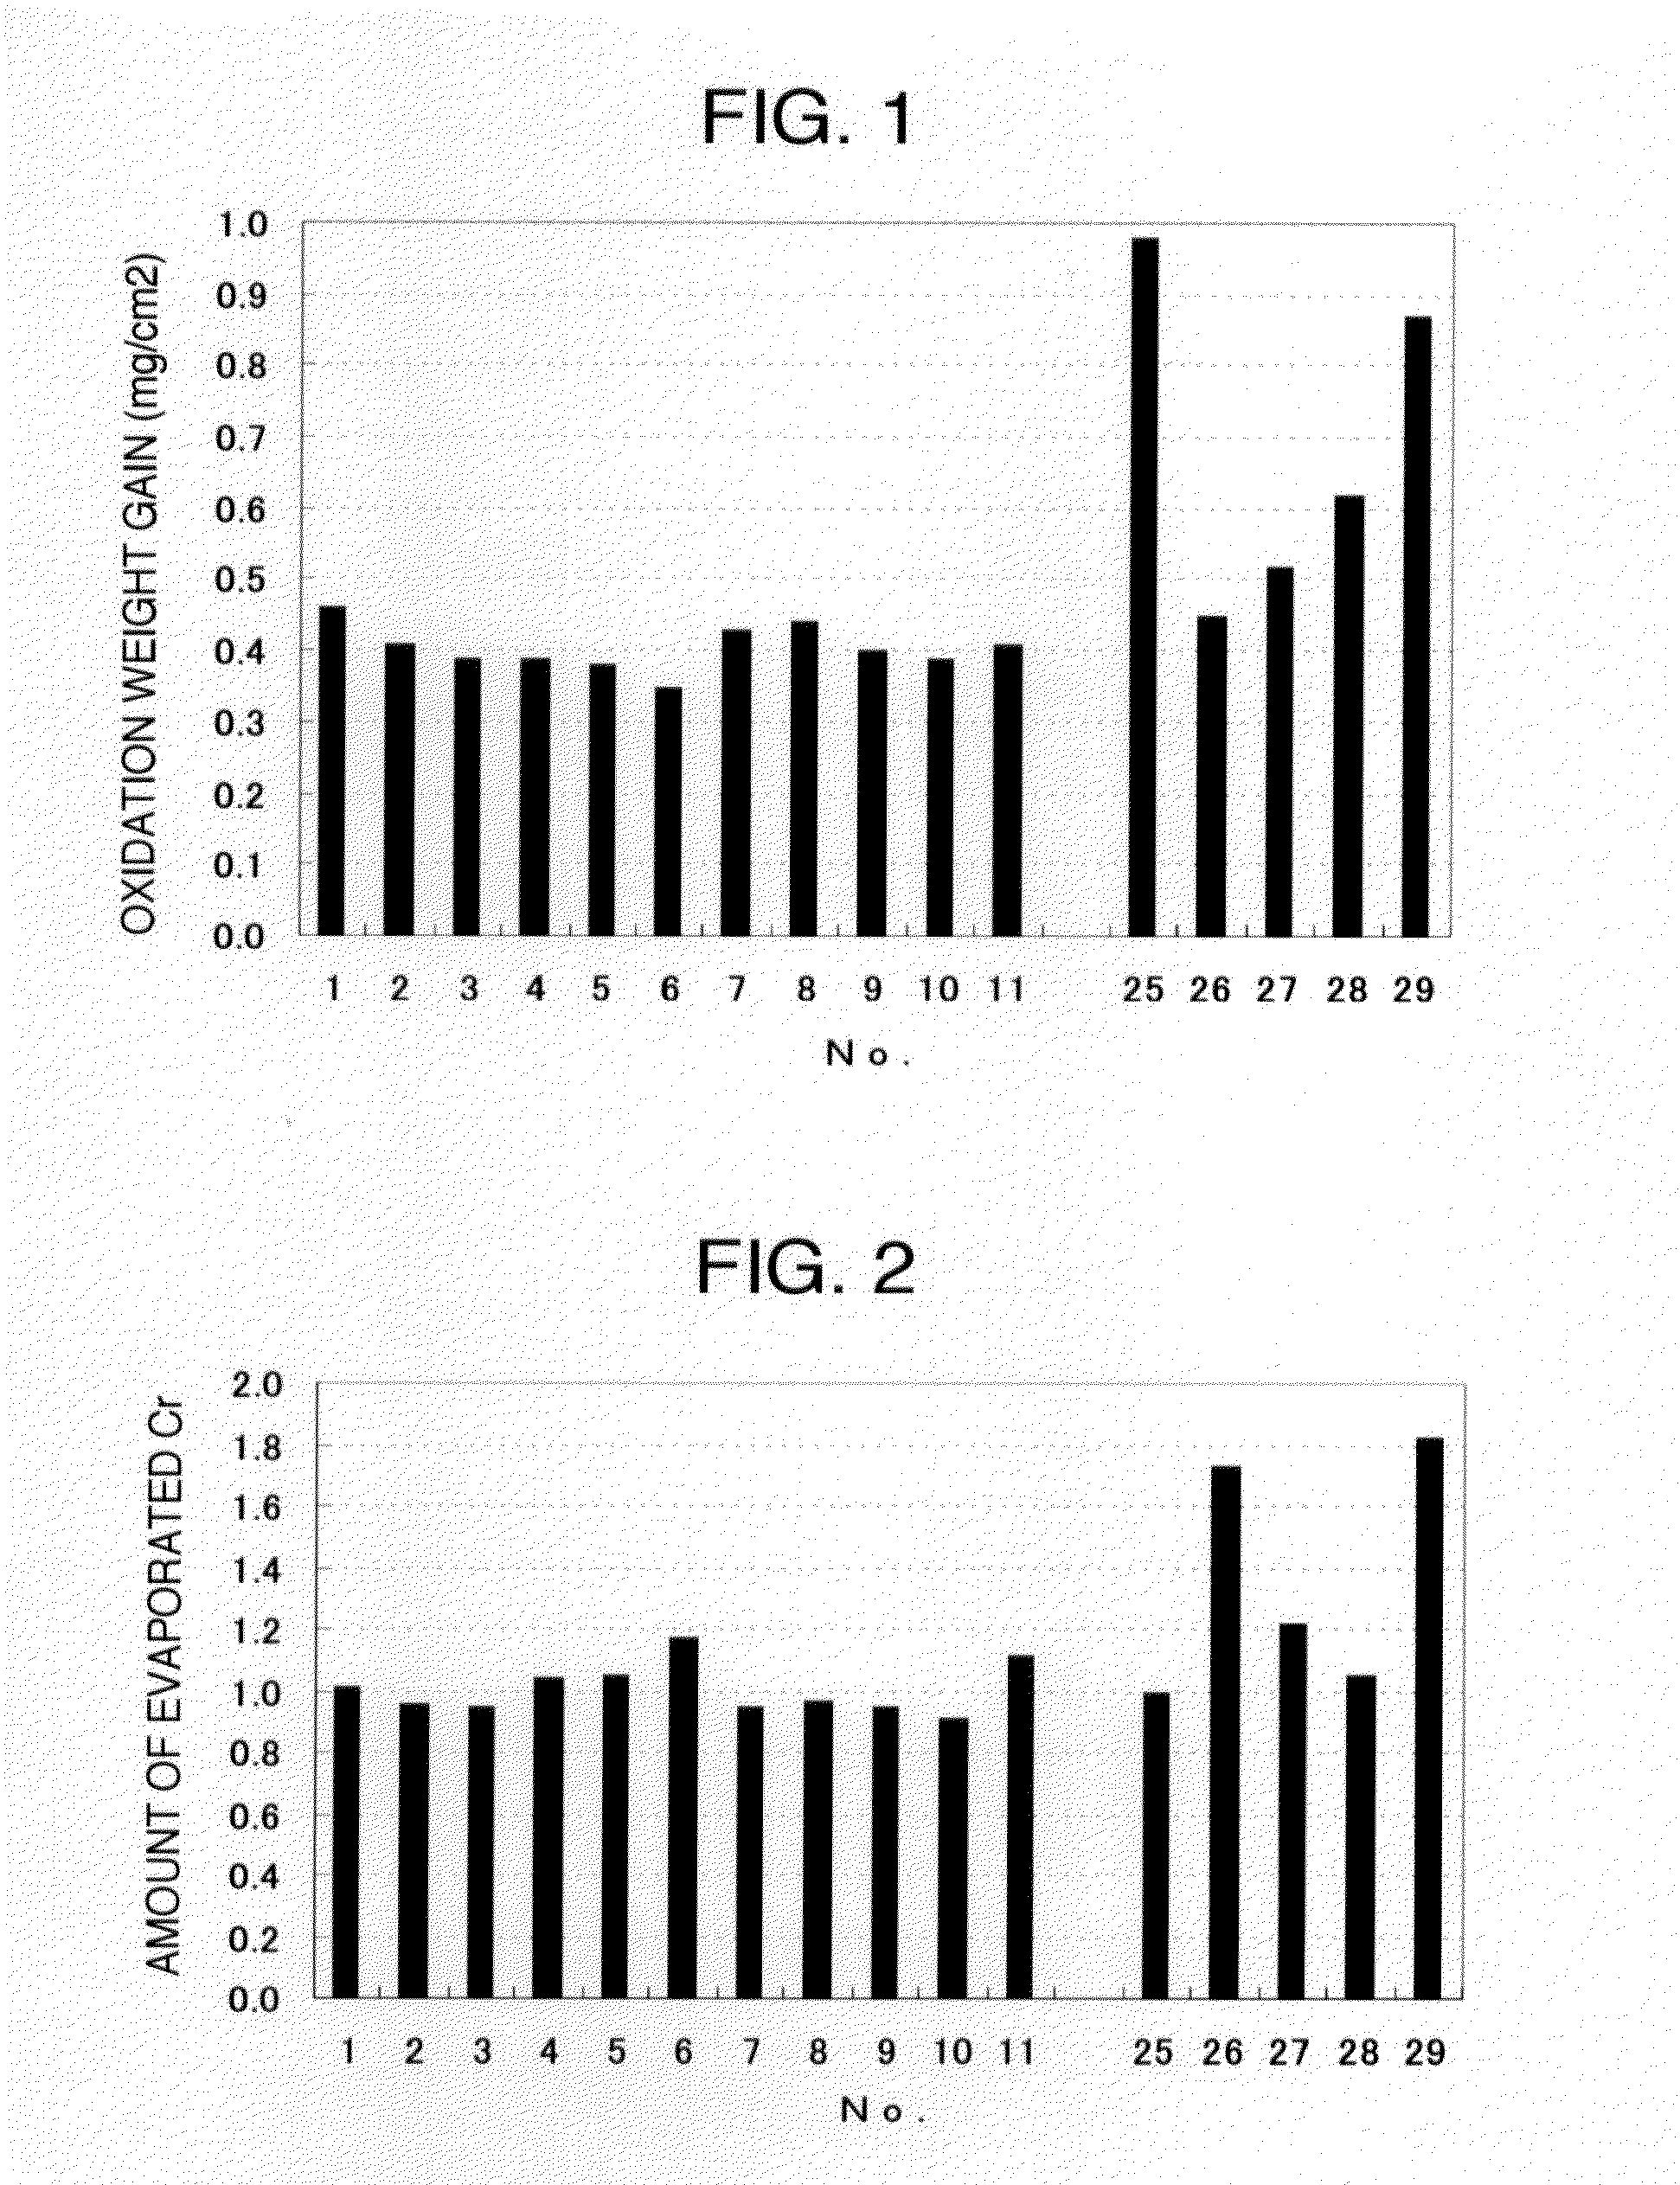 Steel for solid oxide fuel cell having excellent oxidation resistance